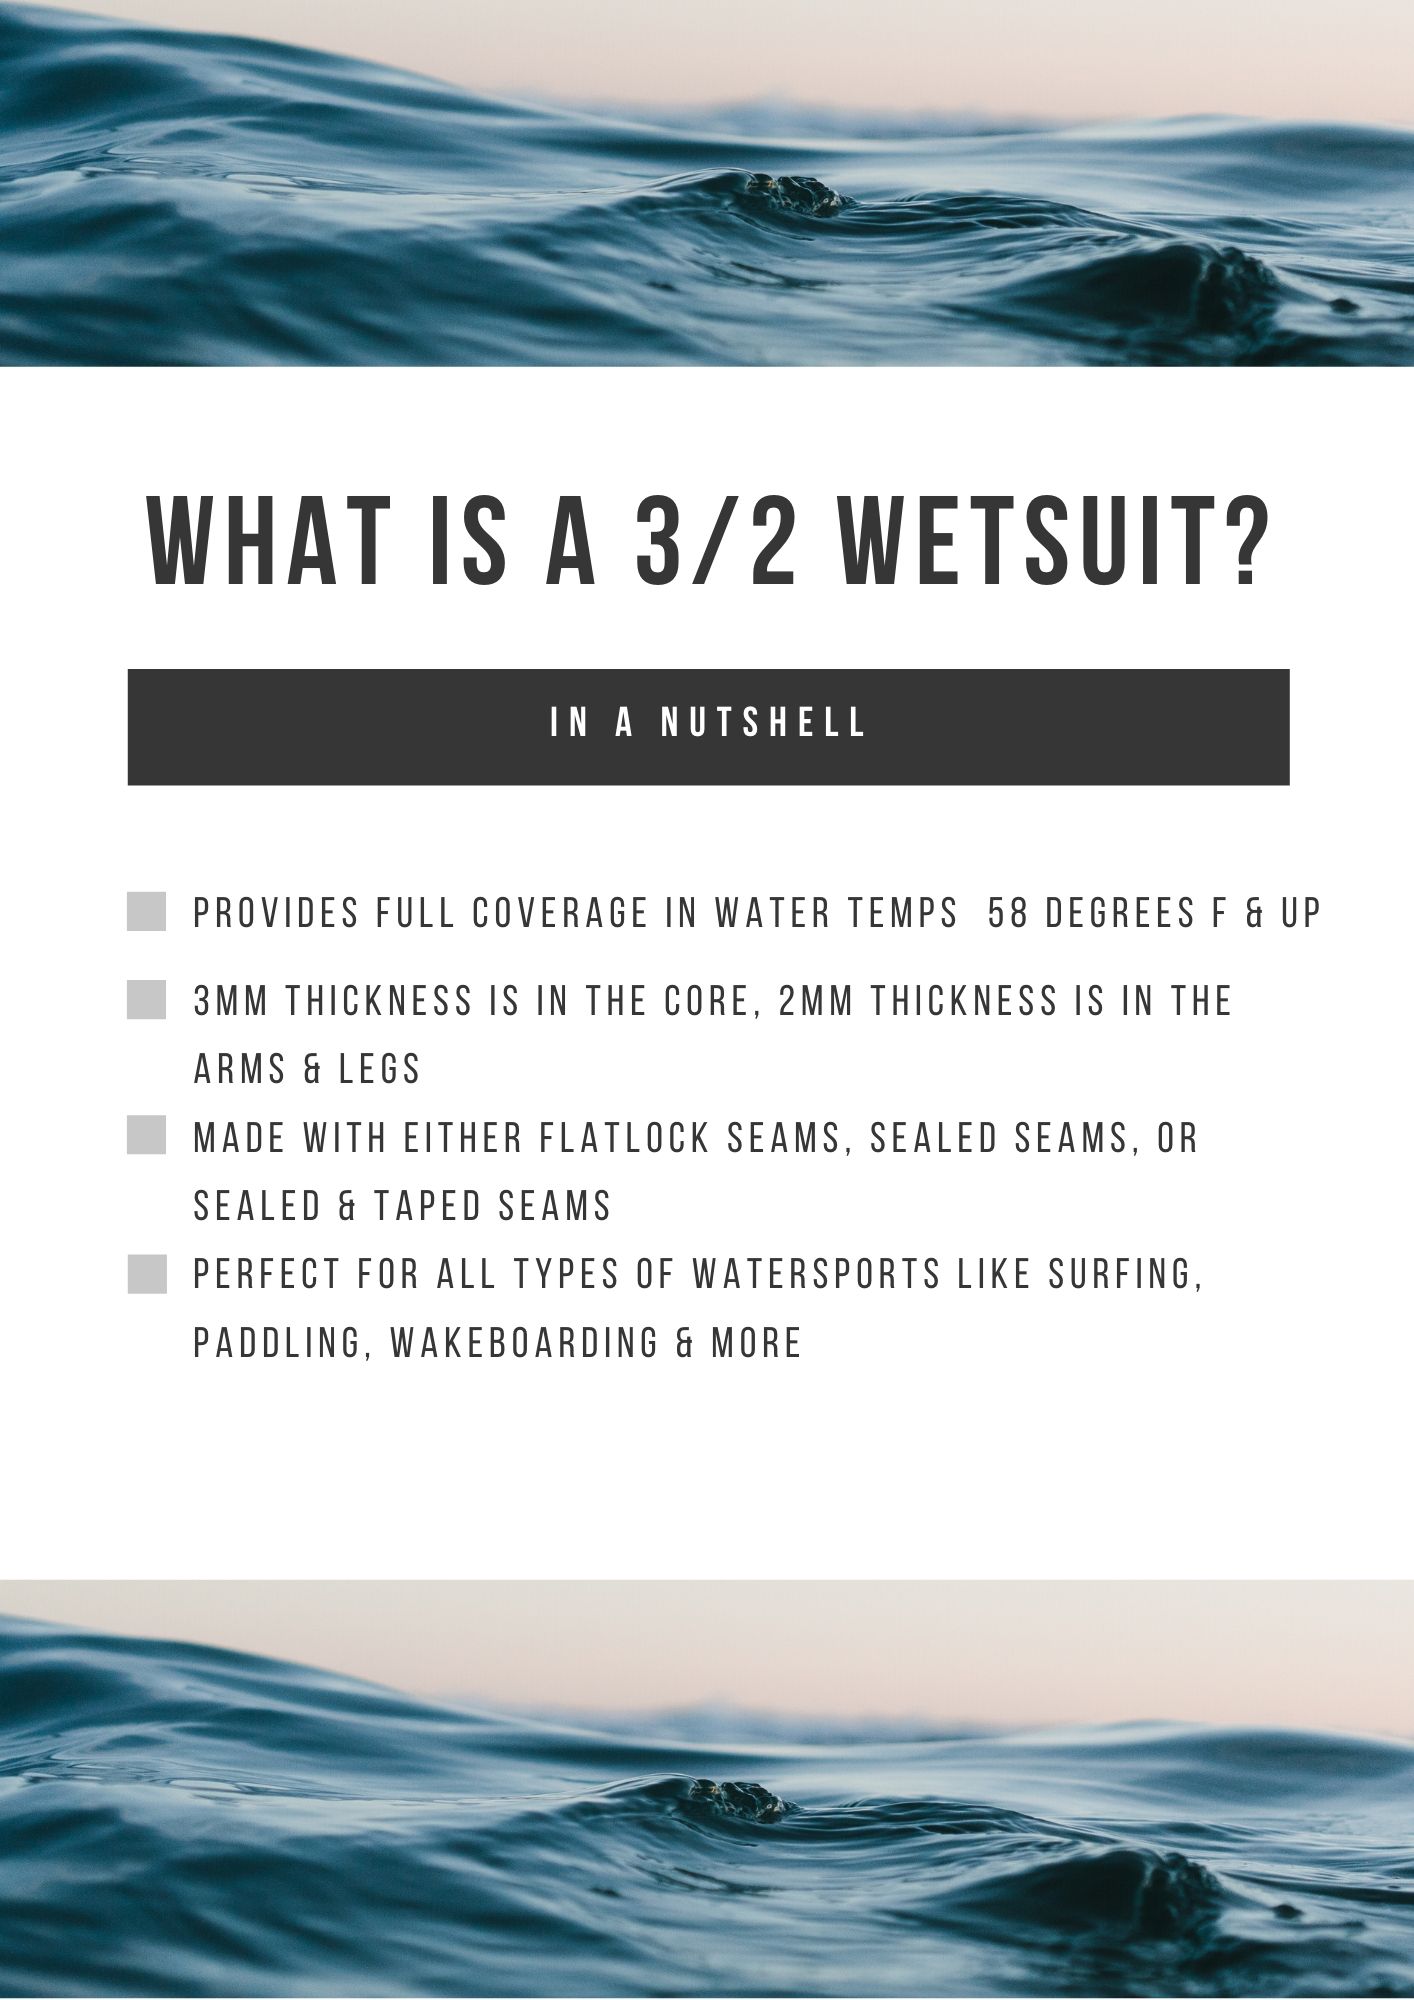 what is a 3/2 wetsuit